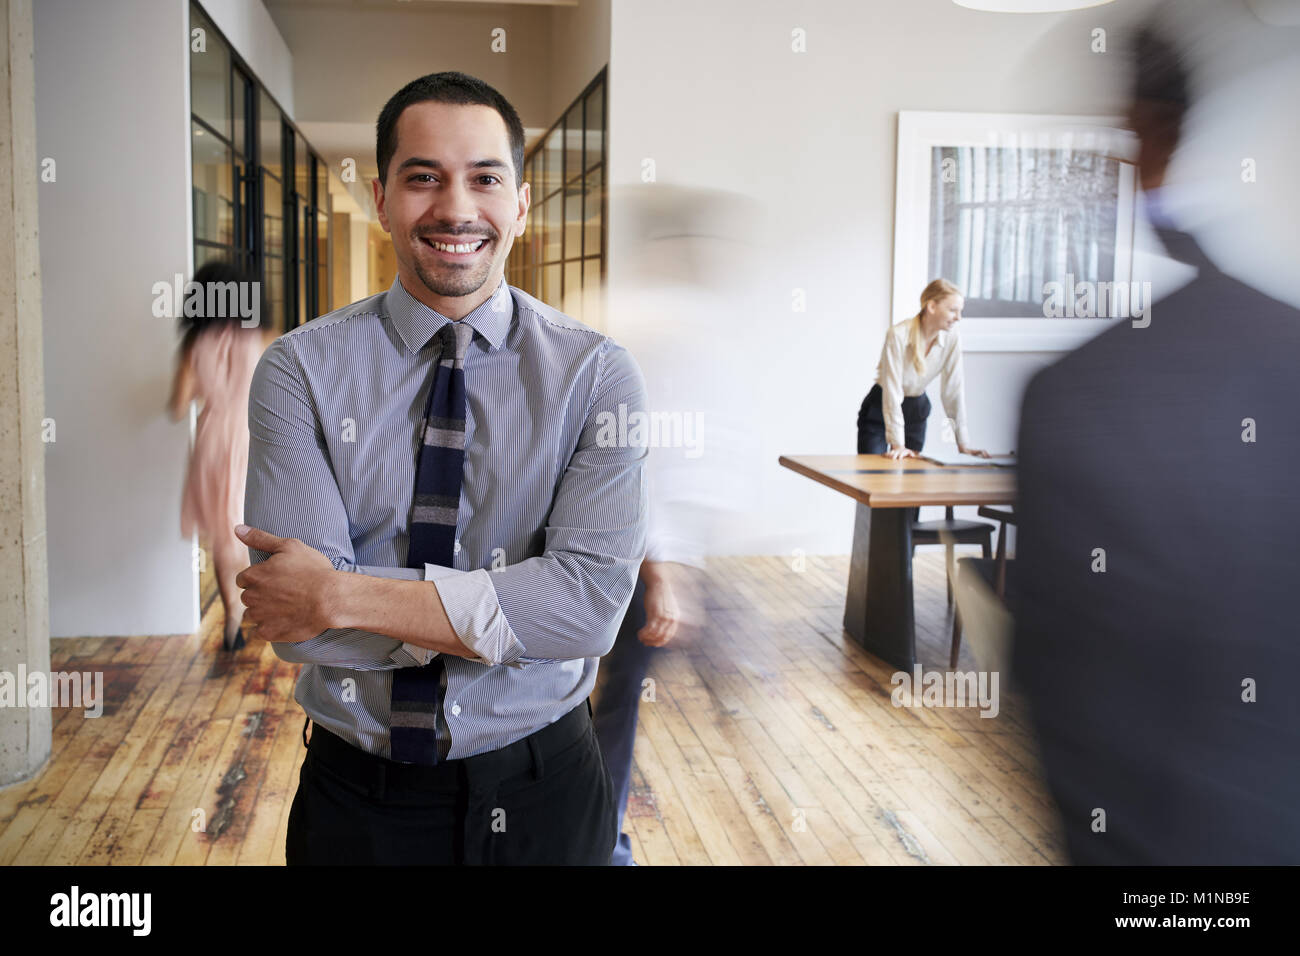 Portrait of young Hispanic man in a busy modern workplace Stock Photo